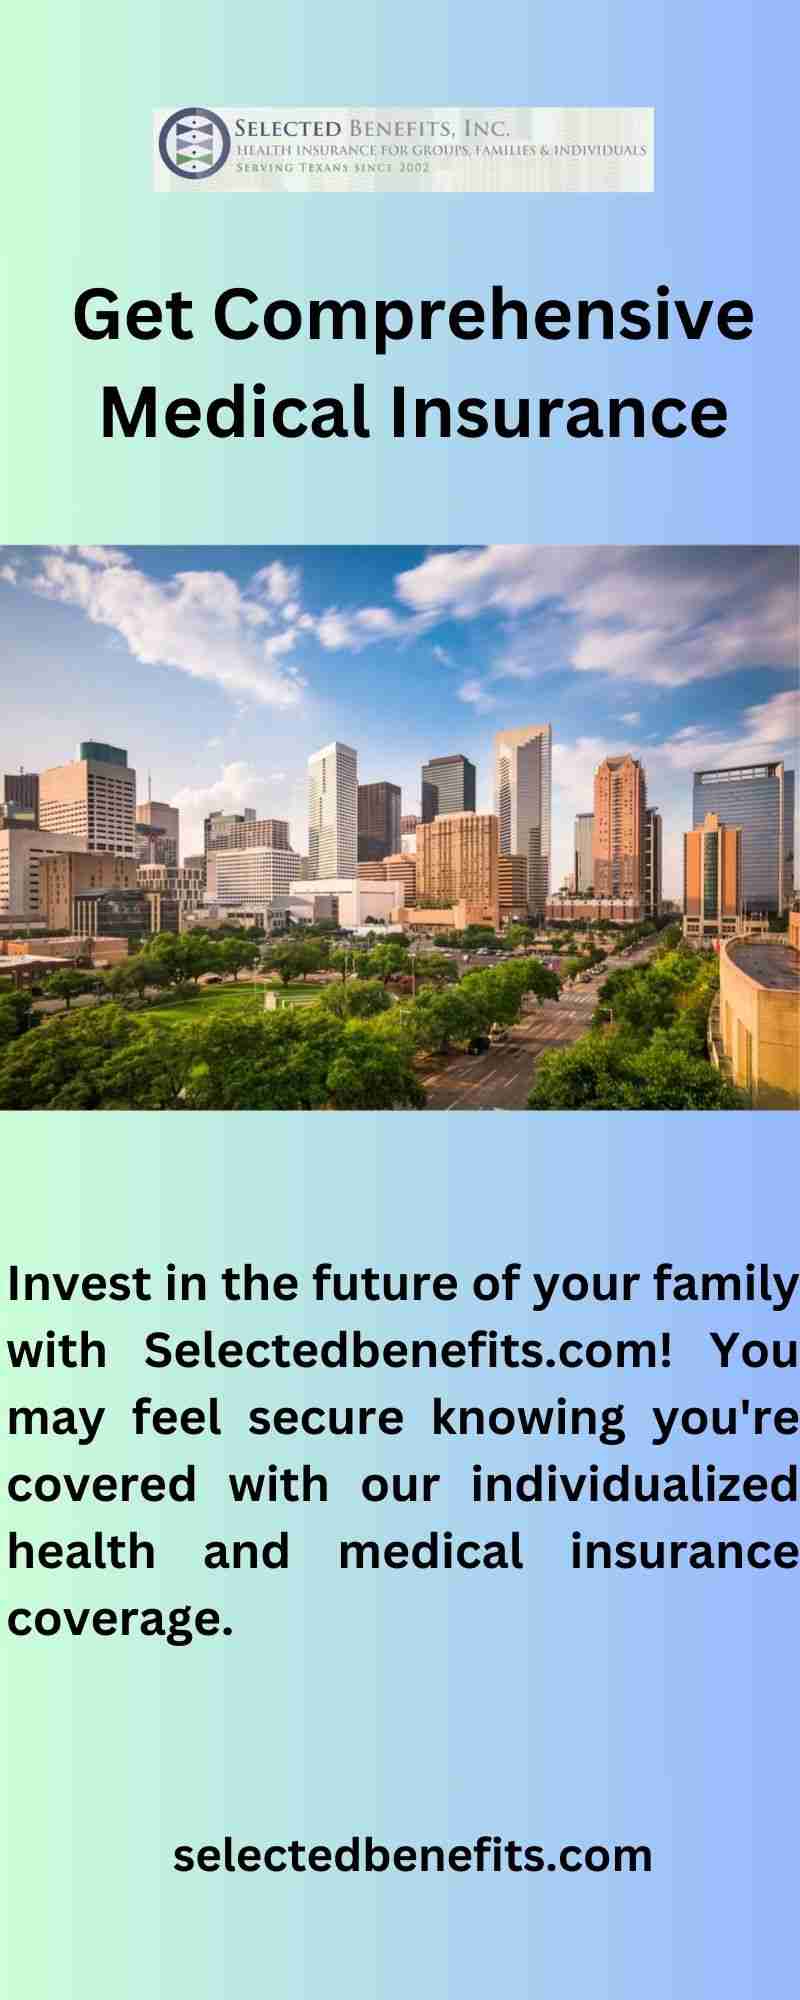 Selected Benefits lnc Profile Picture